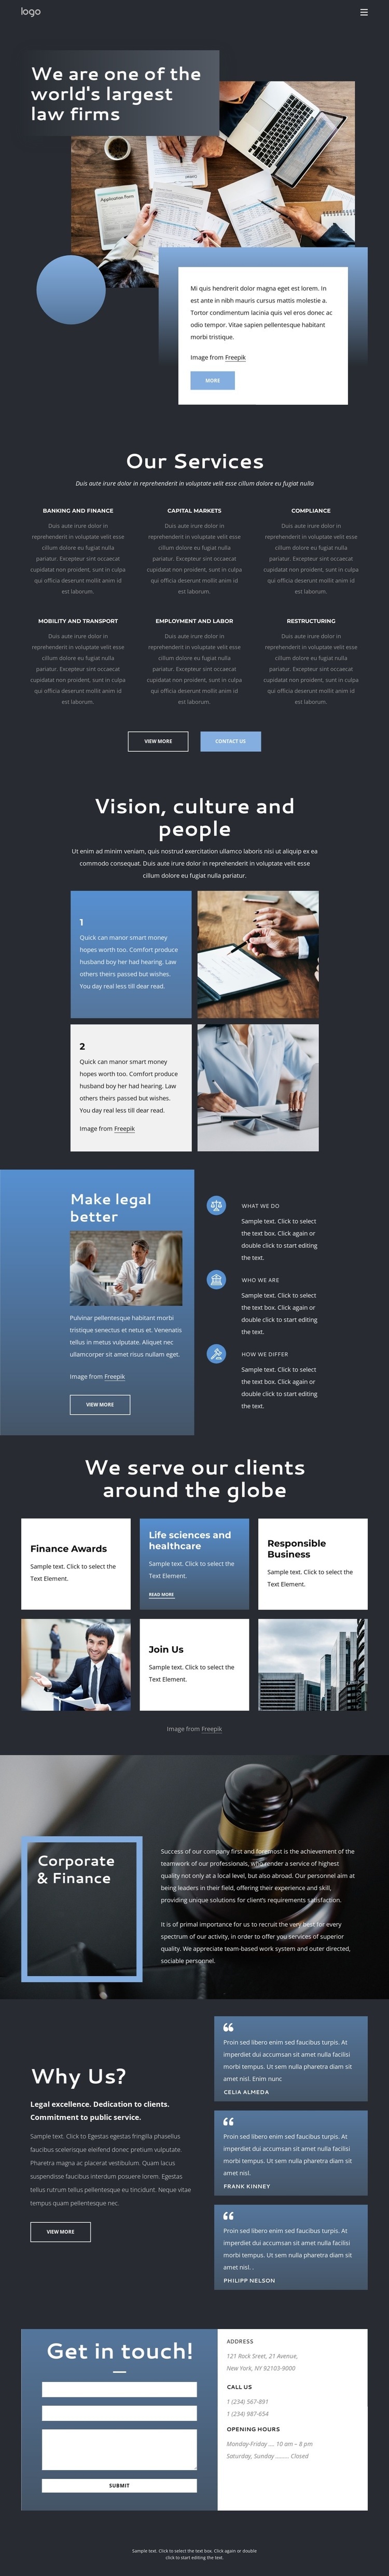 We are an elite law firm Webflow Template Alternative